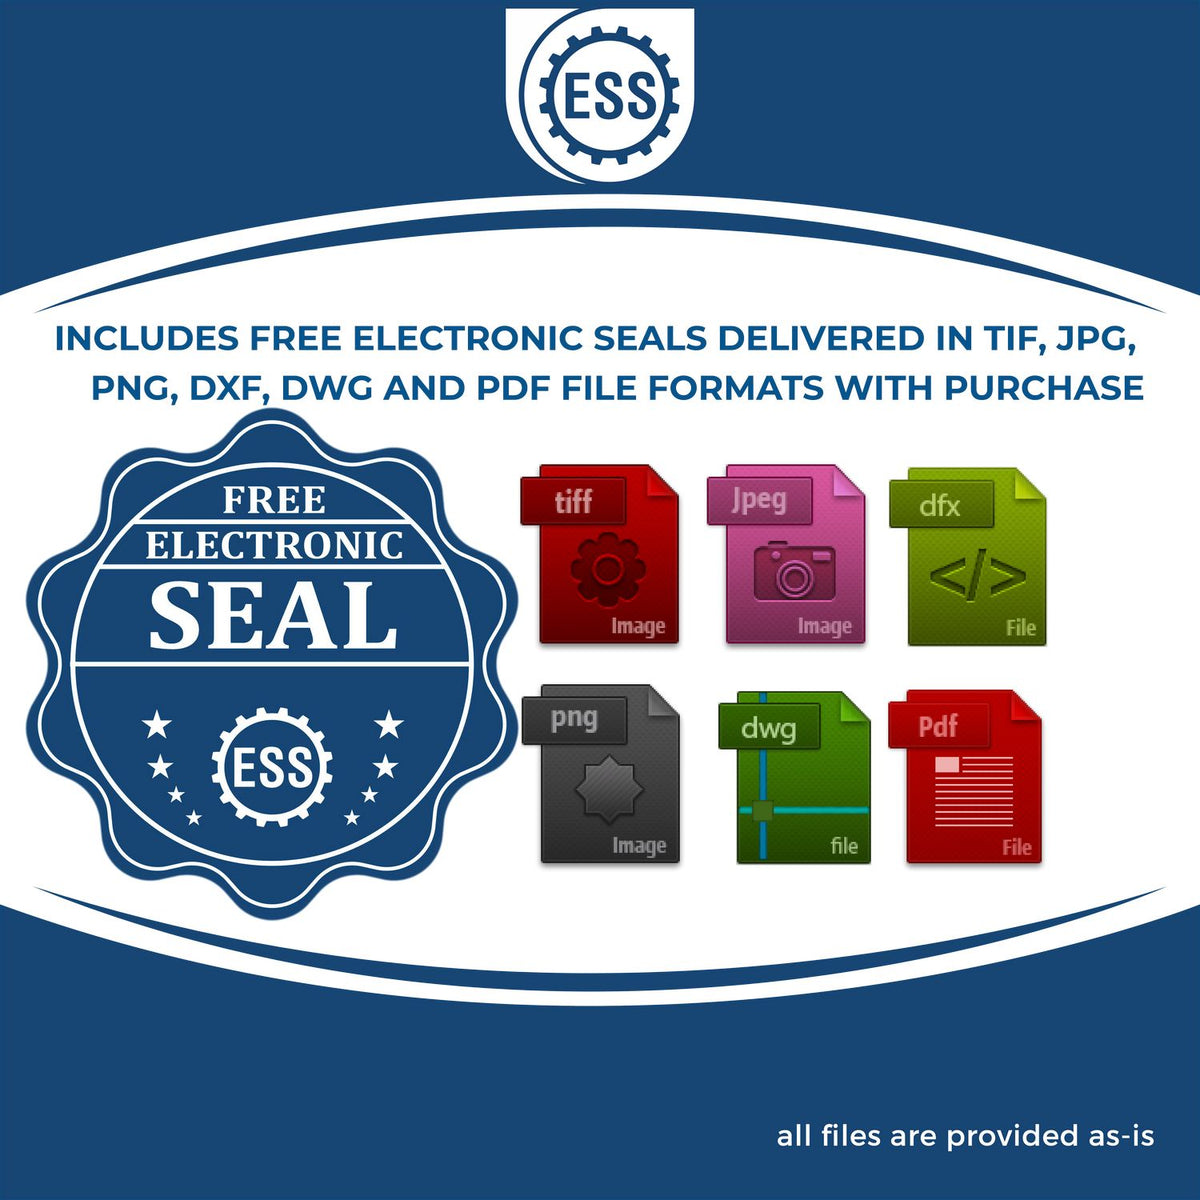 An infographic for the free electronic seal for the Gift Connecticut Land Surveyor Seal illustrating the different file type icons such as DXF, DWG, TIF, JPG and PNG.